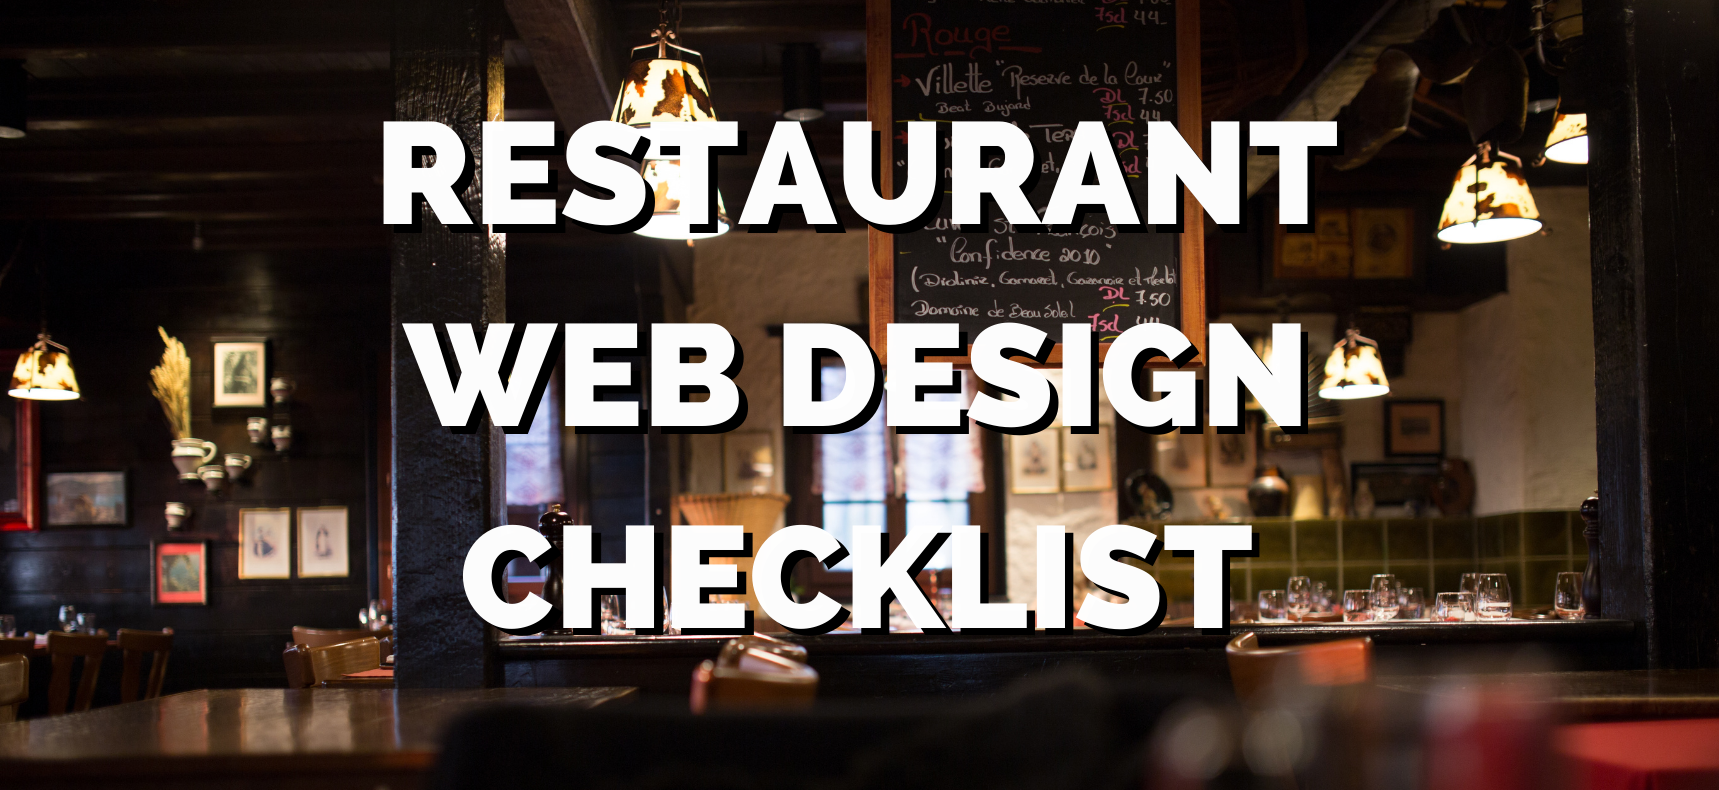 a list of pages a restaurant website should have